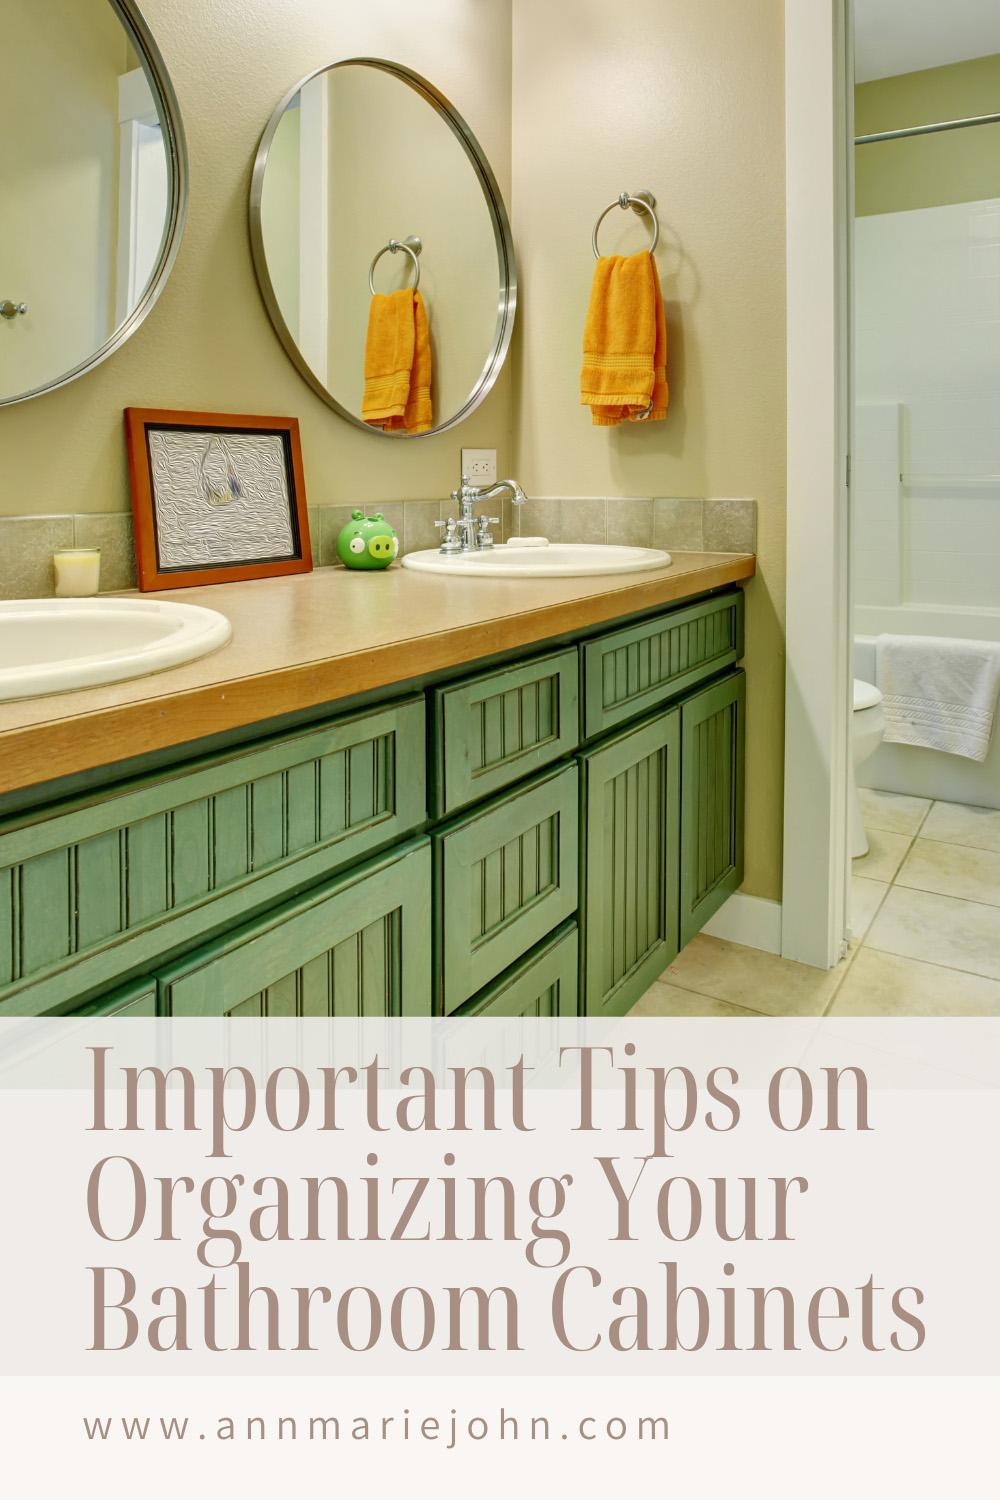 Important Tips on Organizing Your Bathroom Cabinets